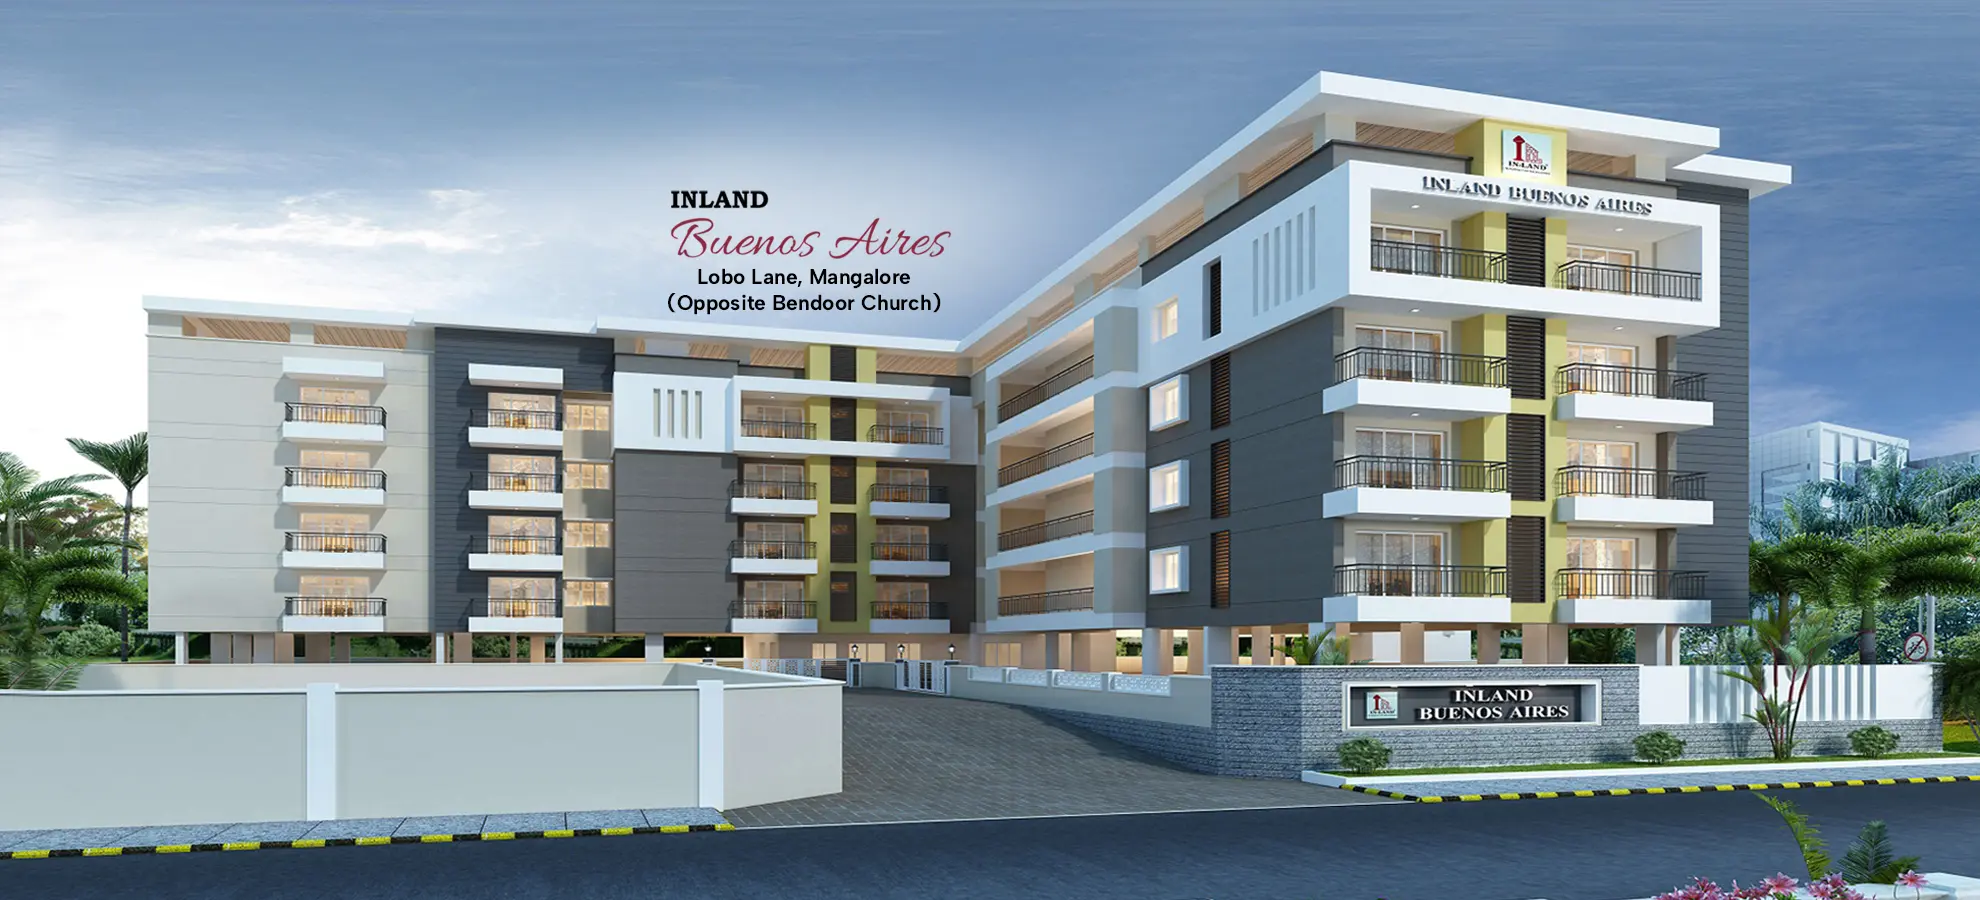 IN-LAND Buenos Aires New Commercial Complex Project in Mangalore